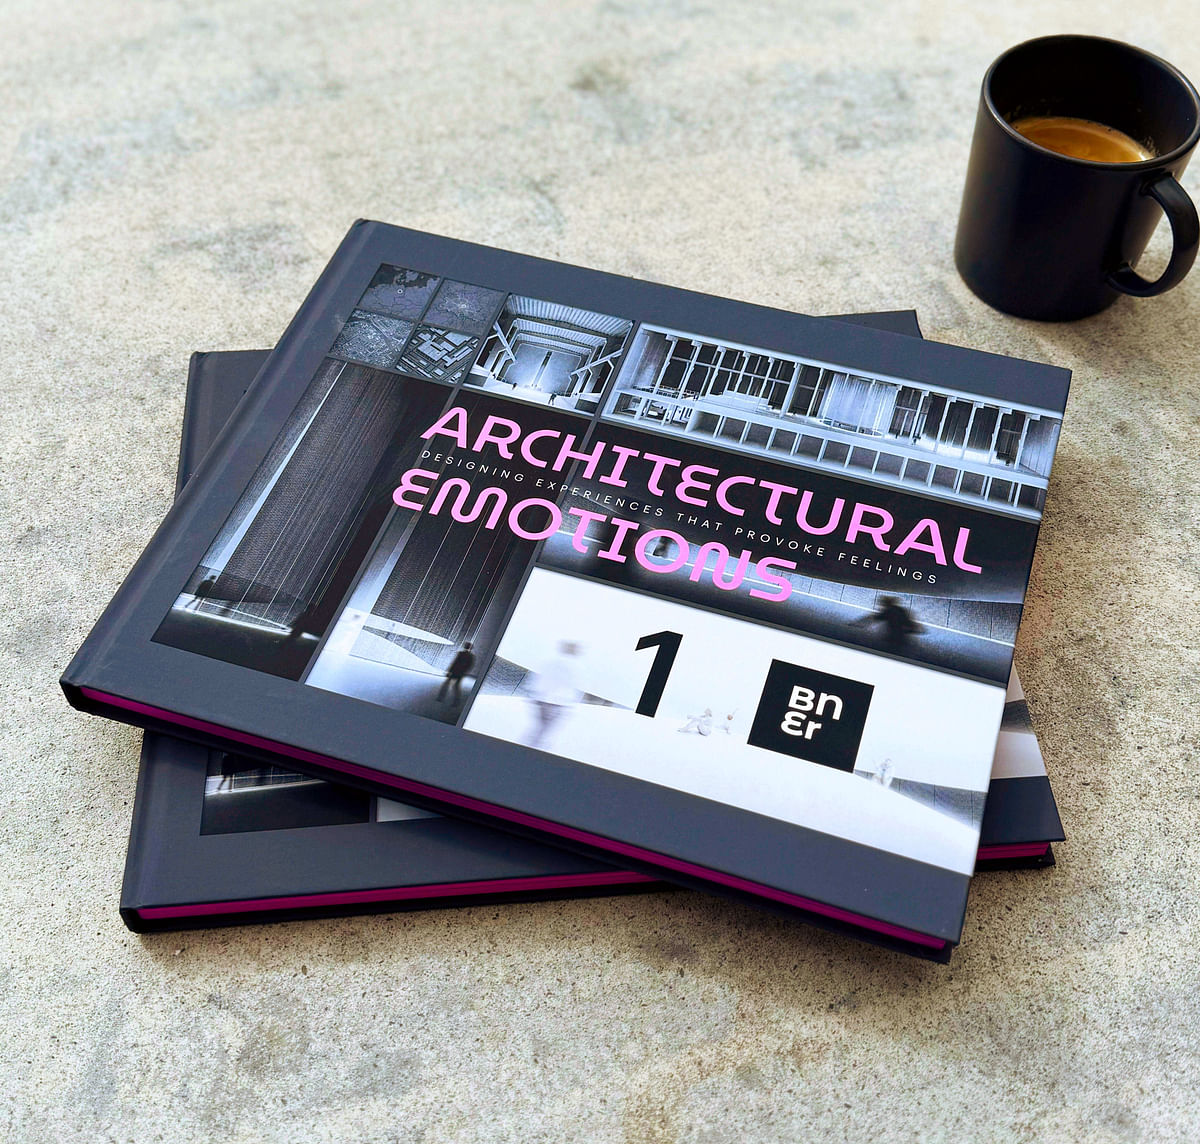 Architecture and emotions explored in new book: "Emotional Architecture" [Sponsored]